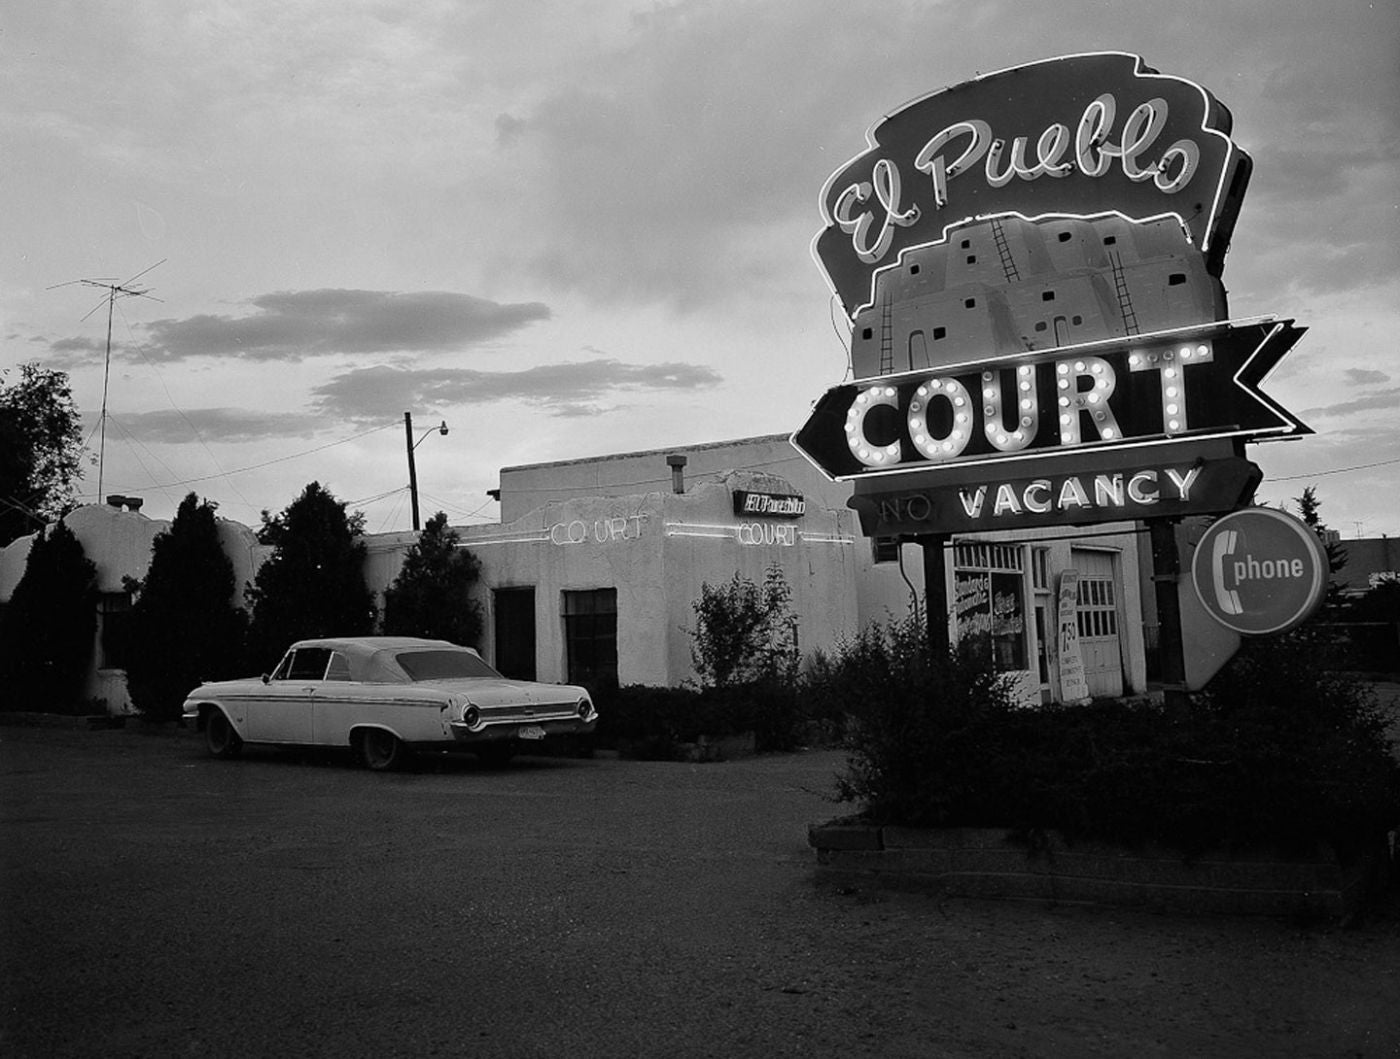 NZ Library #1: John Schott: Route 66, Special Limited Edition (with Gelatin Silver Contact Print "Untitled" from the Series "Route 66 Motels," El Pueblo Court Motel with Neon Vacancy Sign) (NZ Library - Set One, Volume Six)